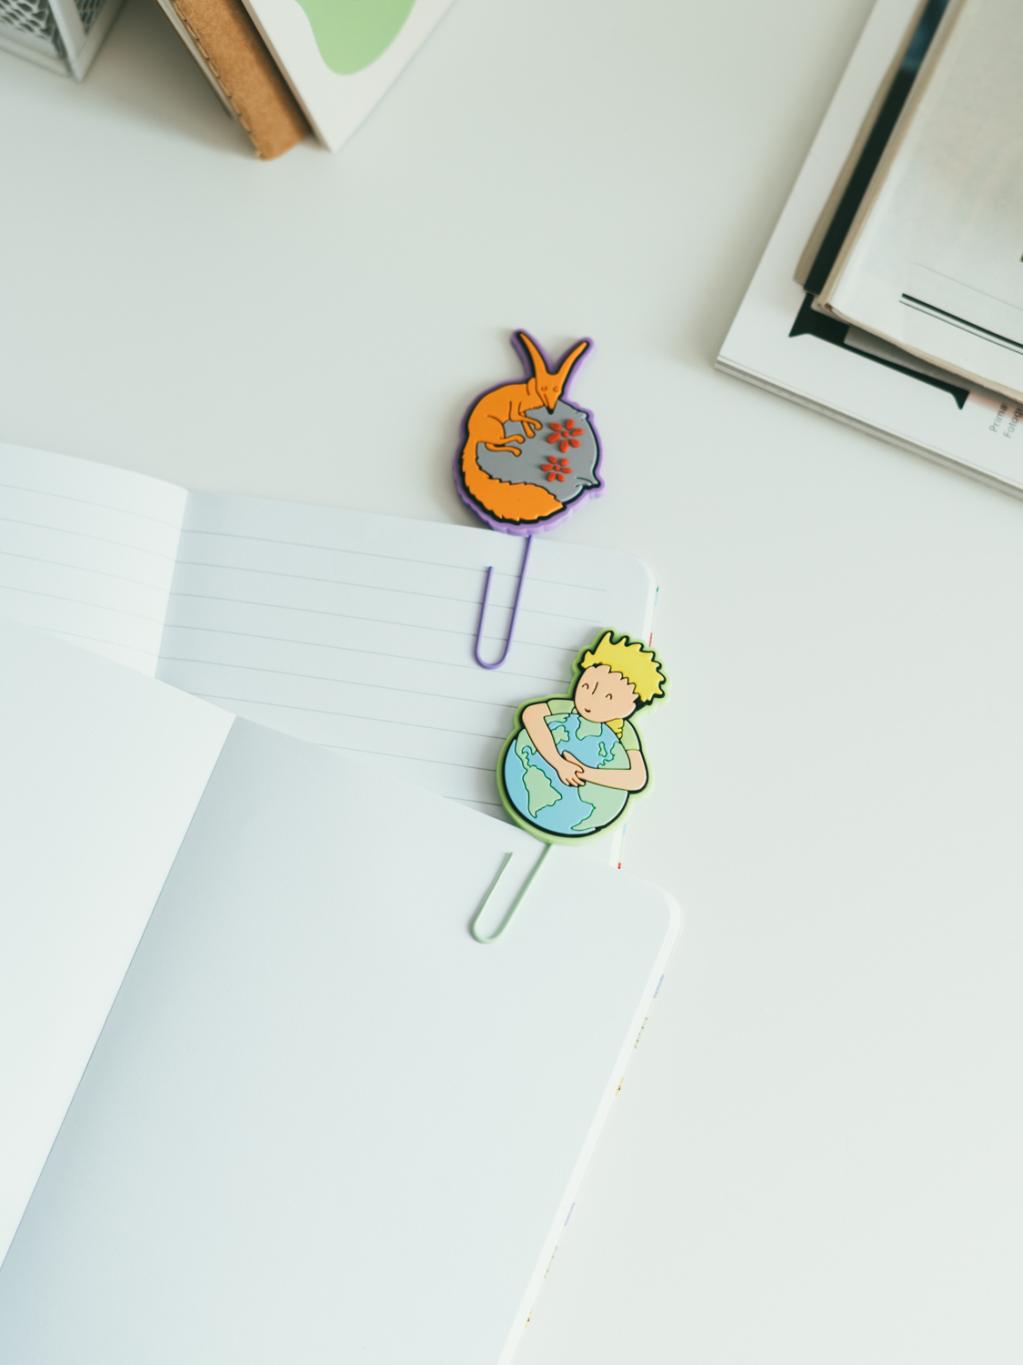 THE LITTLE PRINCE - Stationery Set with 3 A6 Notebooks - 10pc.